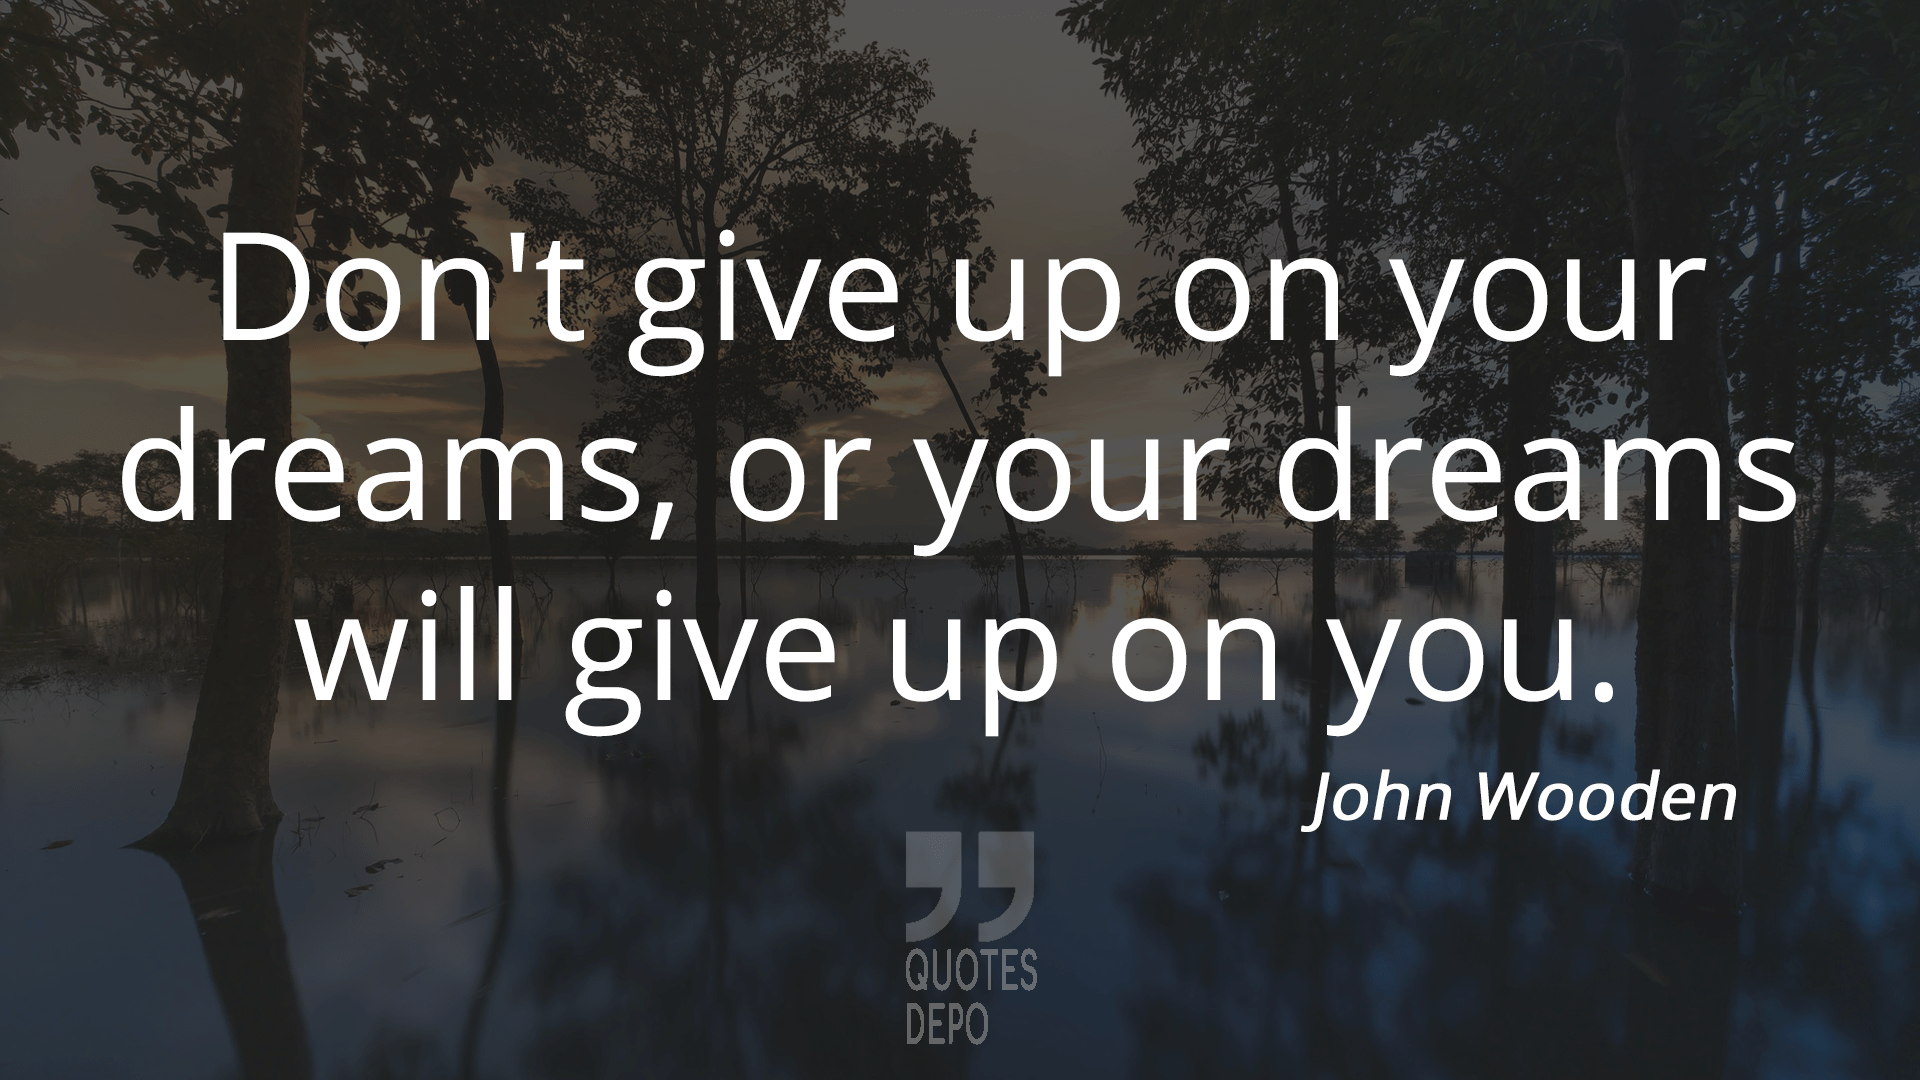 don't give up on your dreams - john wooden quotes